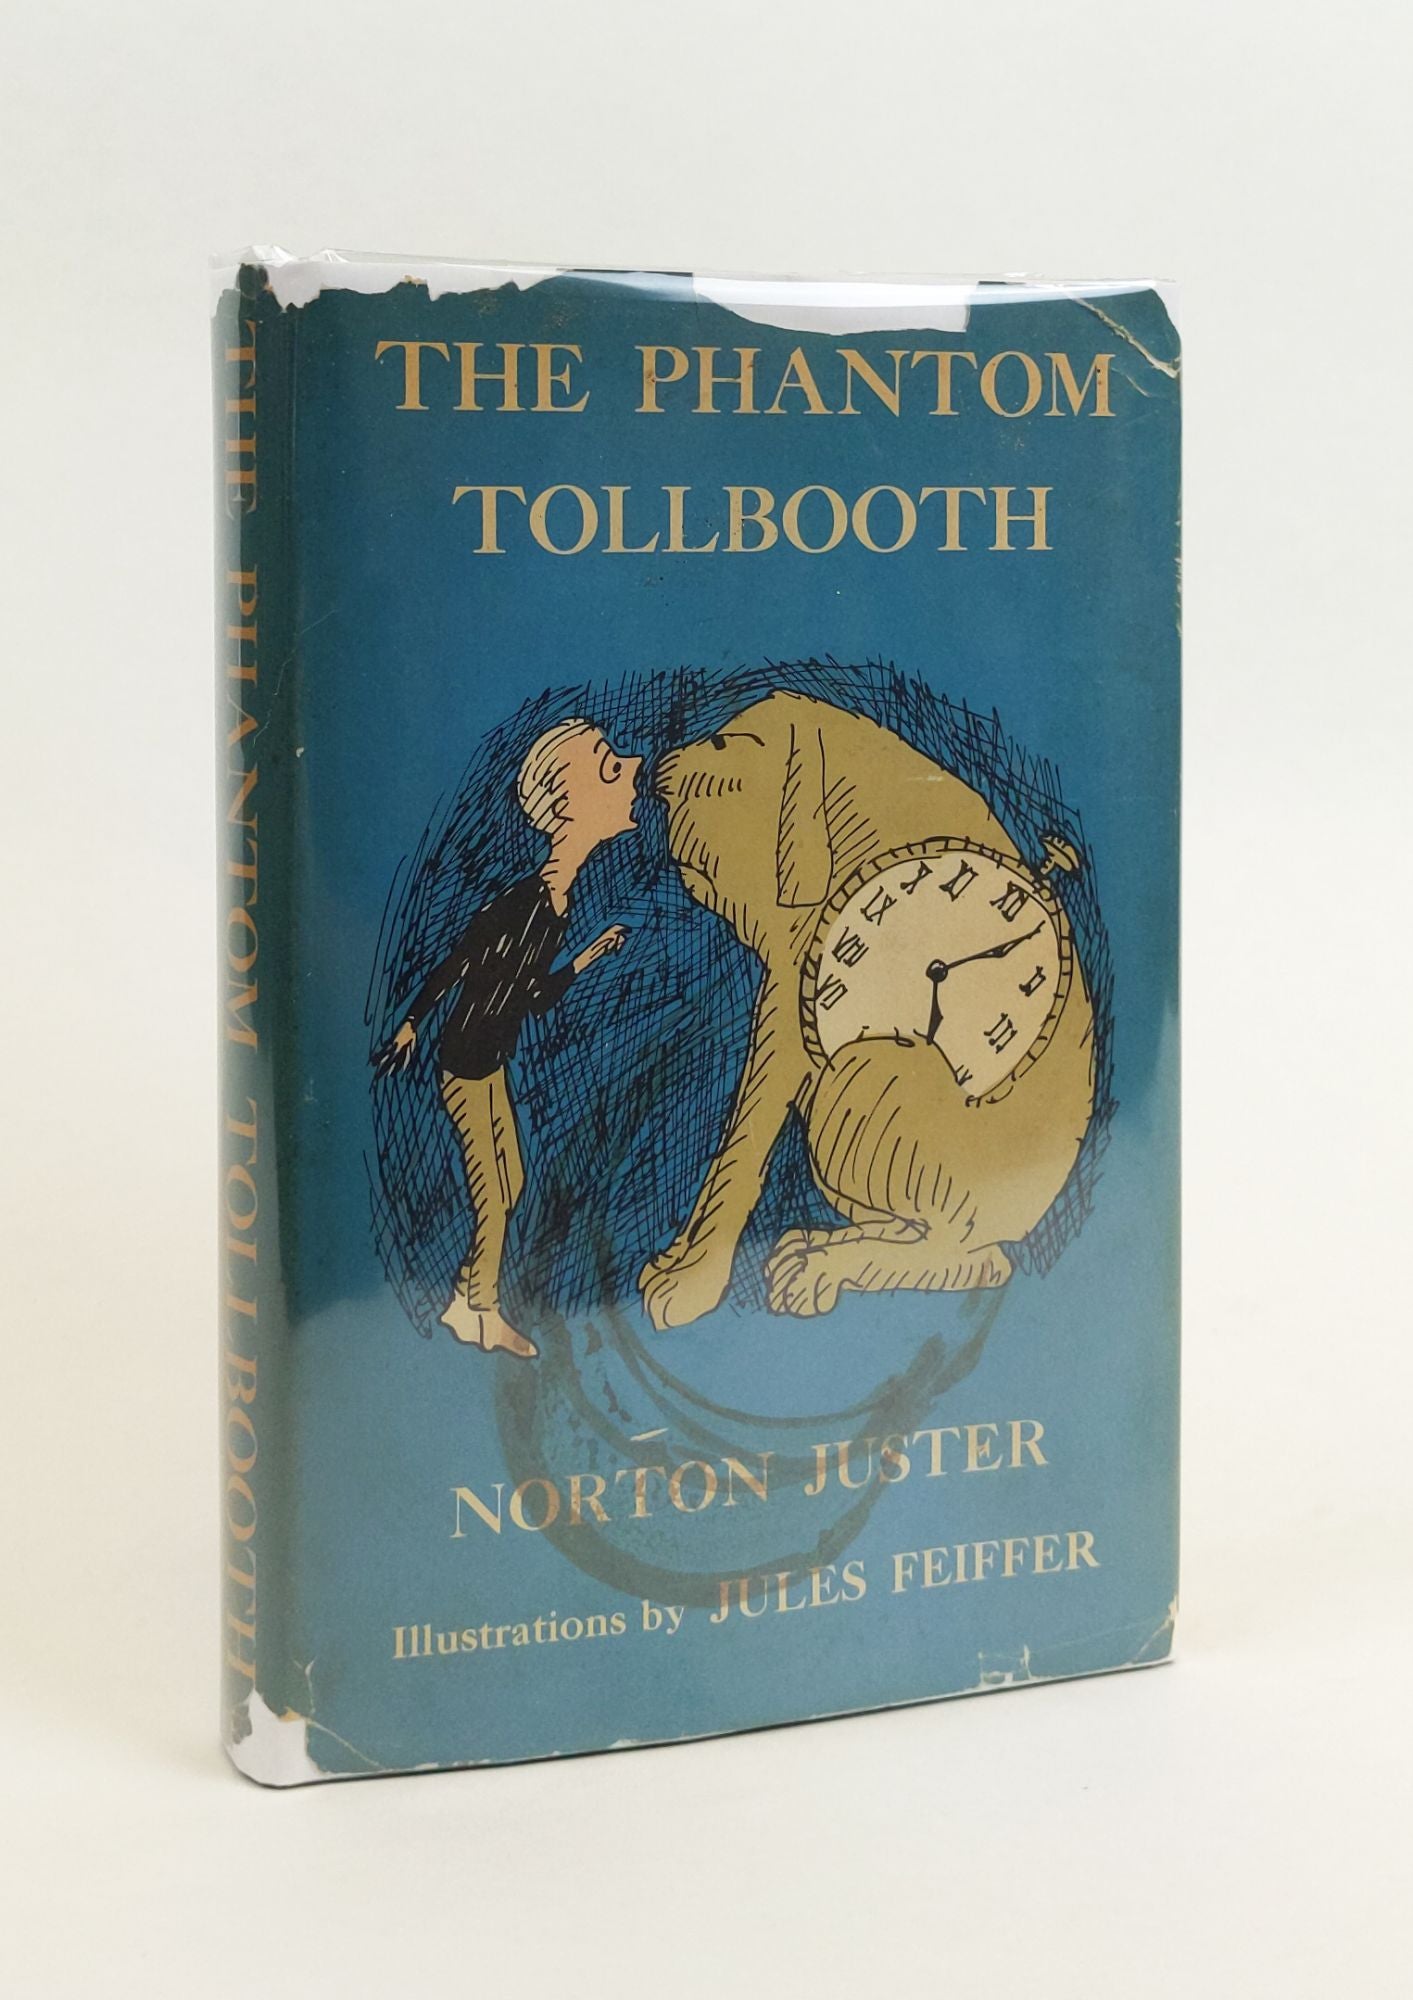 Product Image for THE PHANTOM TOLLBOOTH